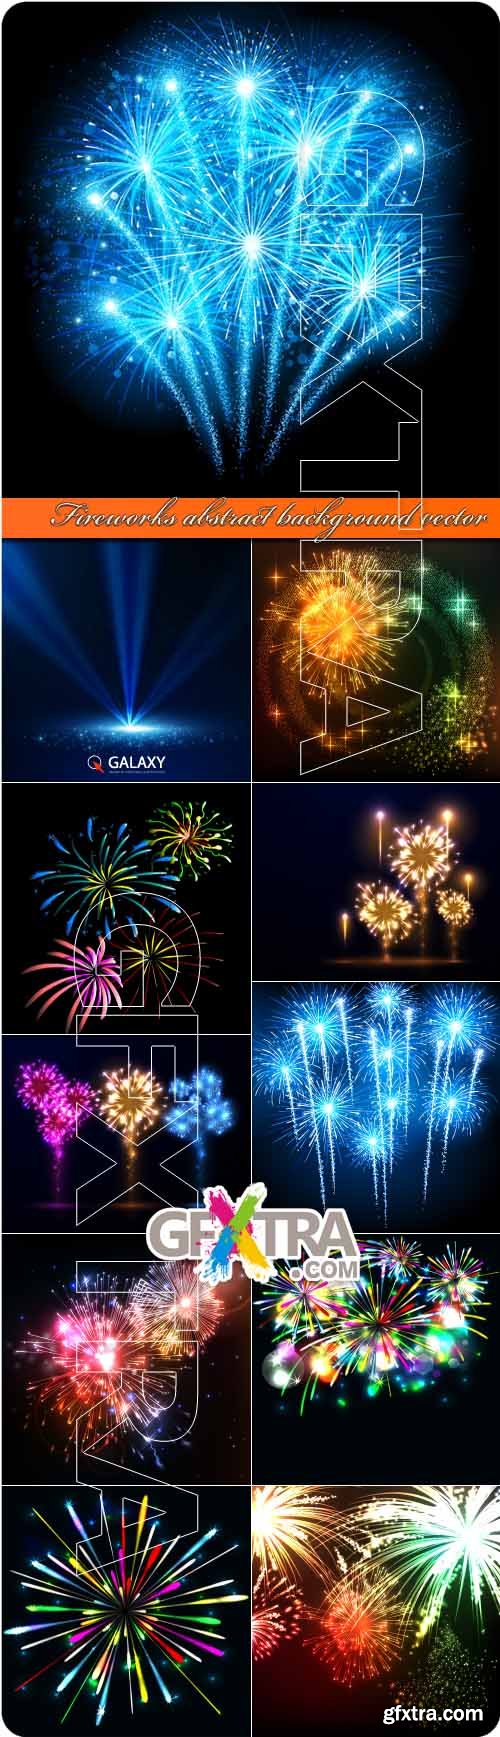 Fireworks abstract background vector